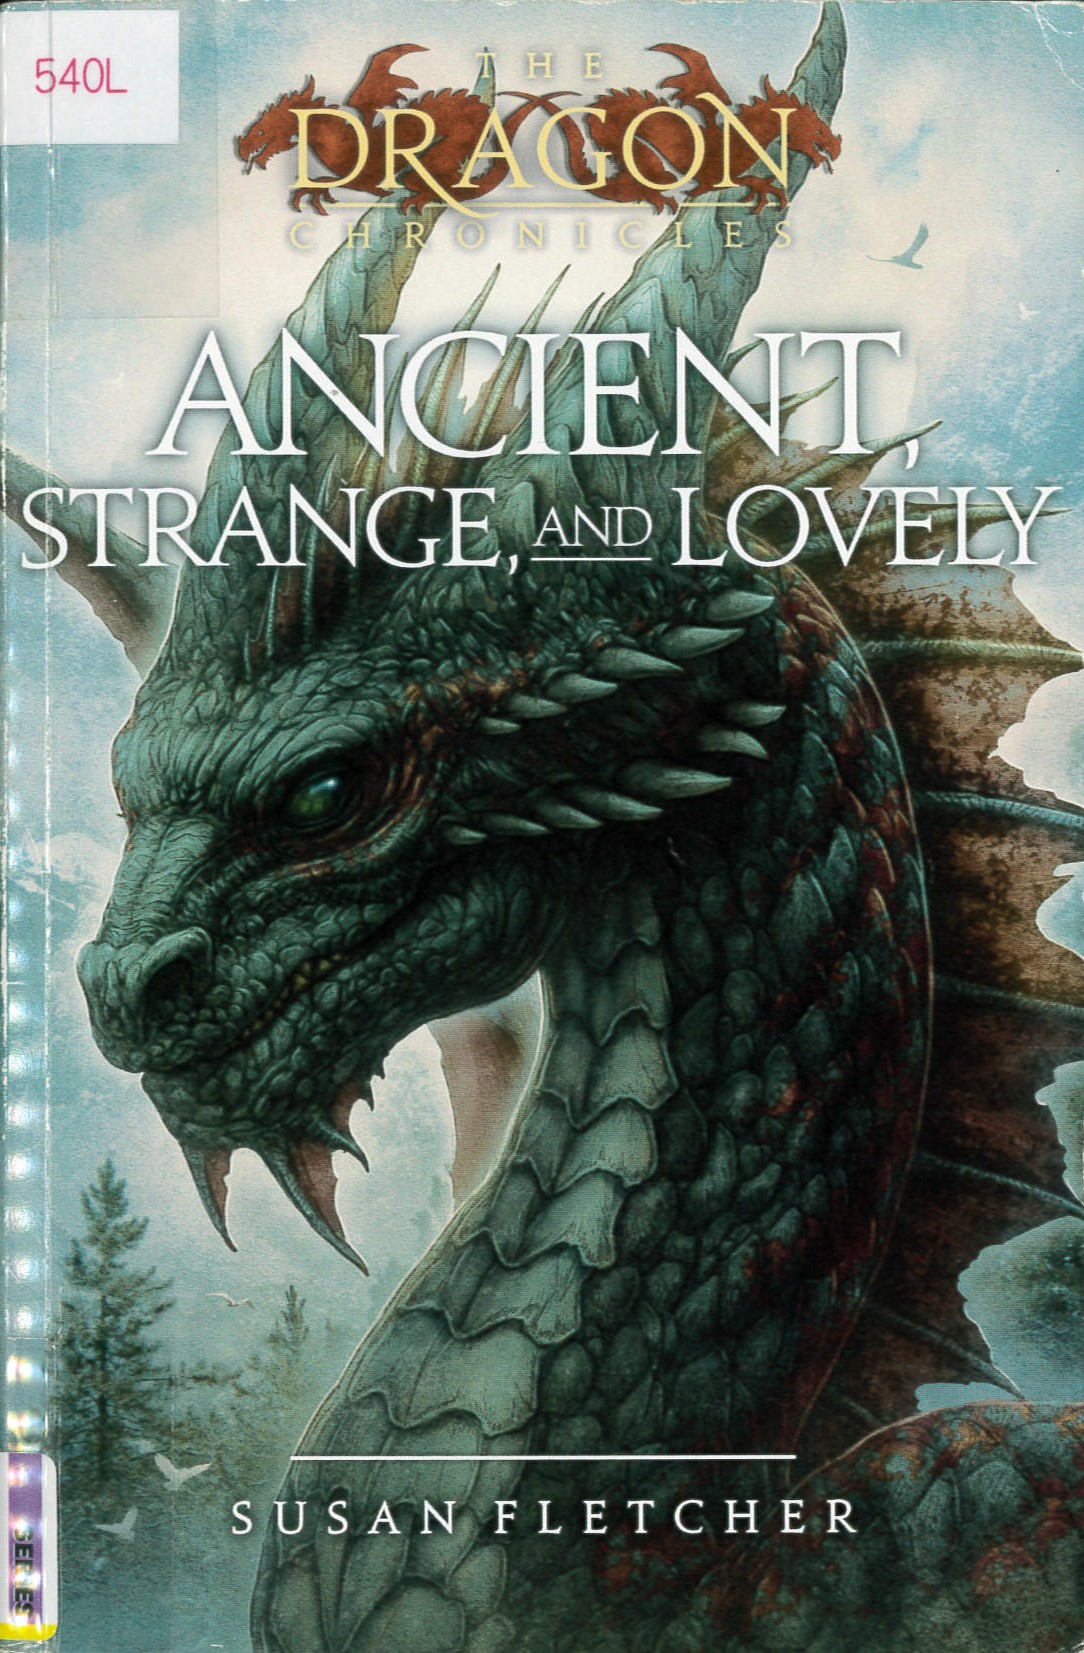 Ancient, strange, and lovely /